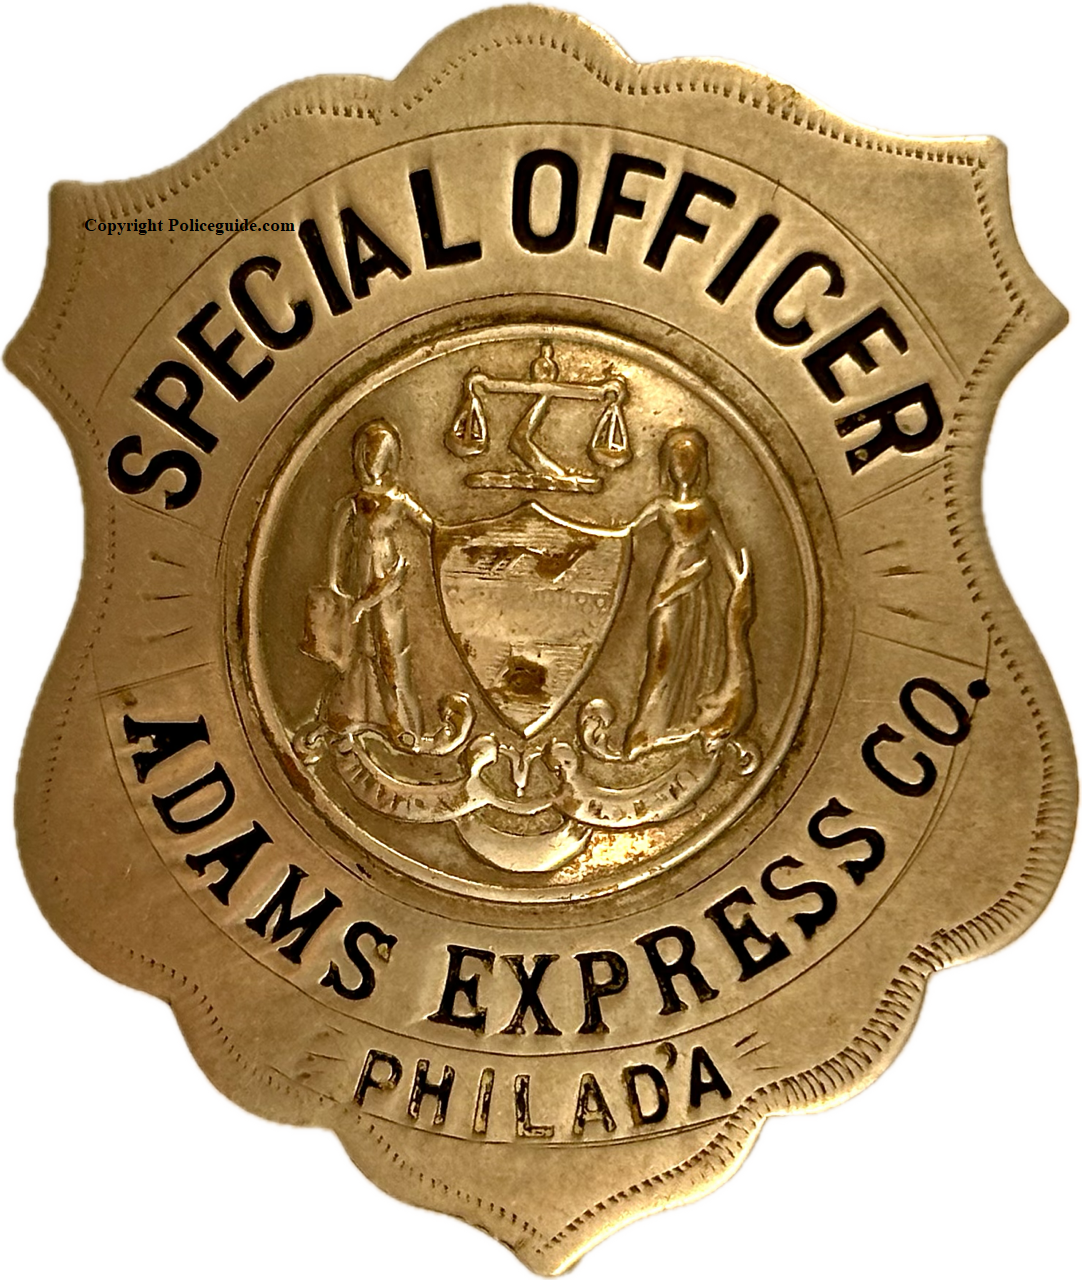 Adams Express Co. Special Officer Philada badge.  Made by Wm Davis & Son Philadelphia.  #35 stamped on the reverse.  